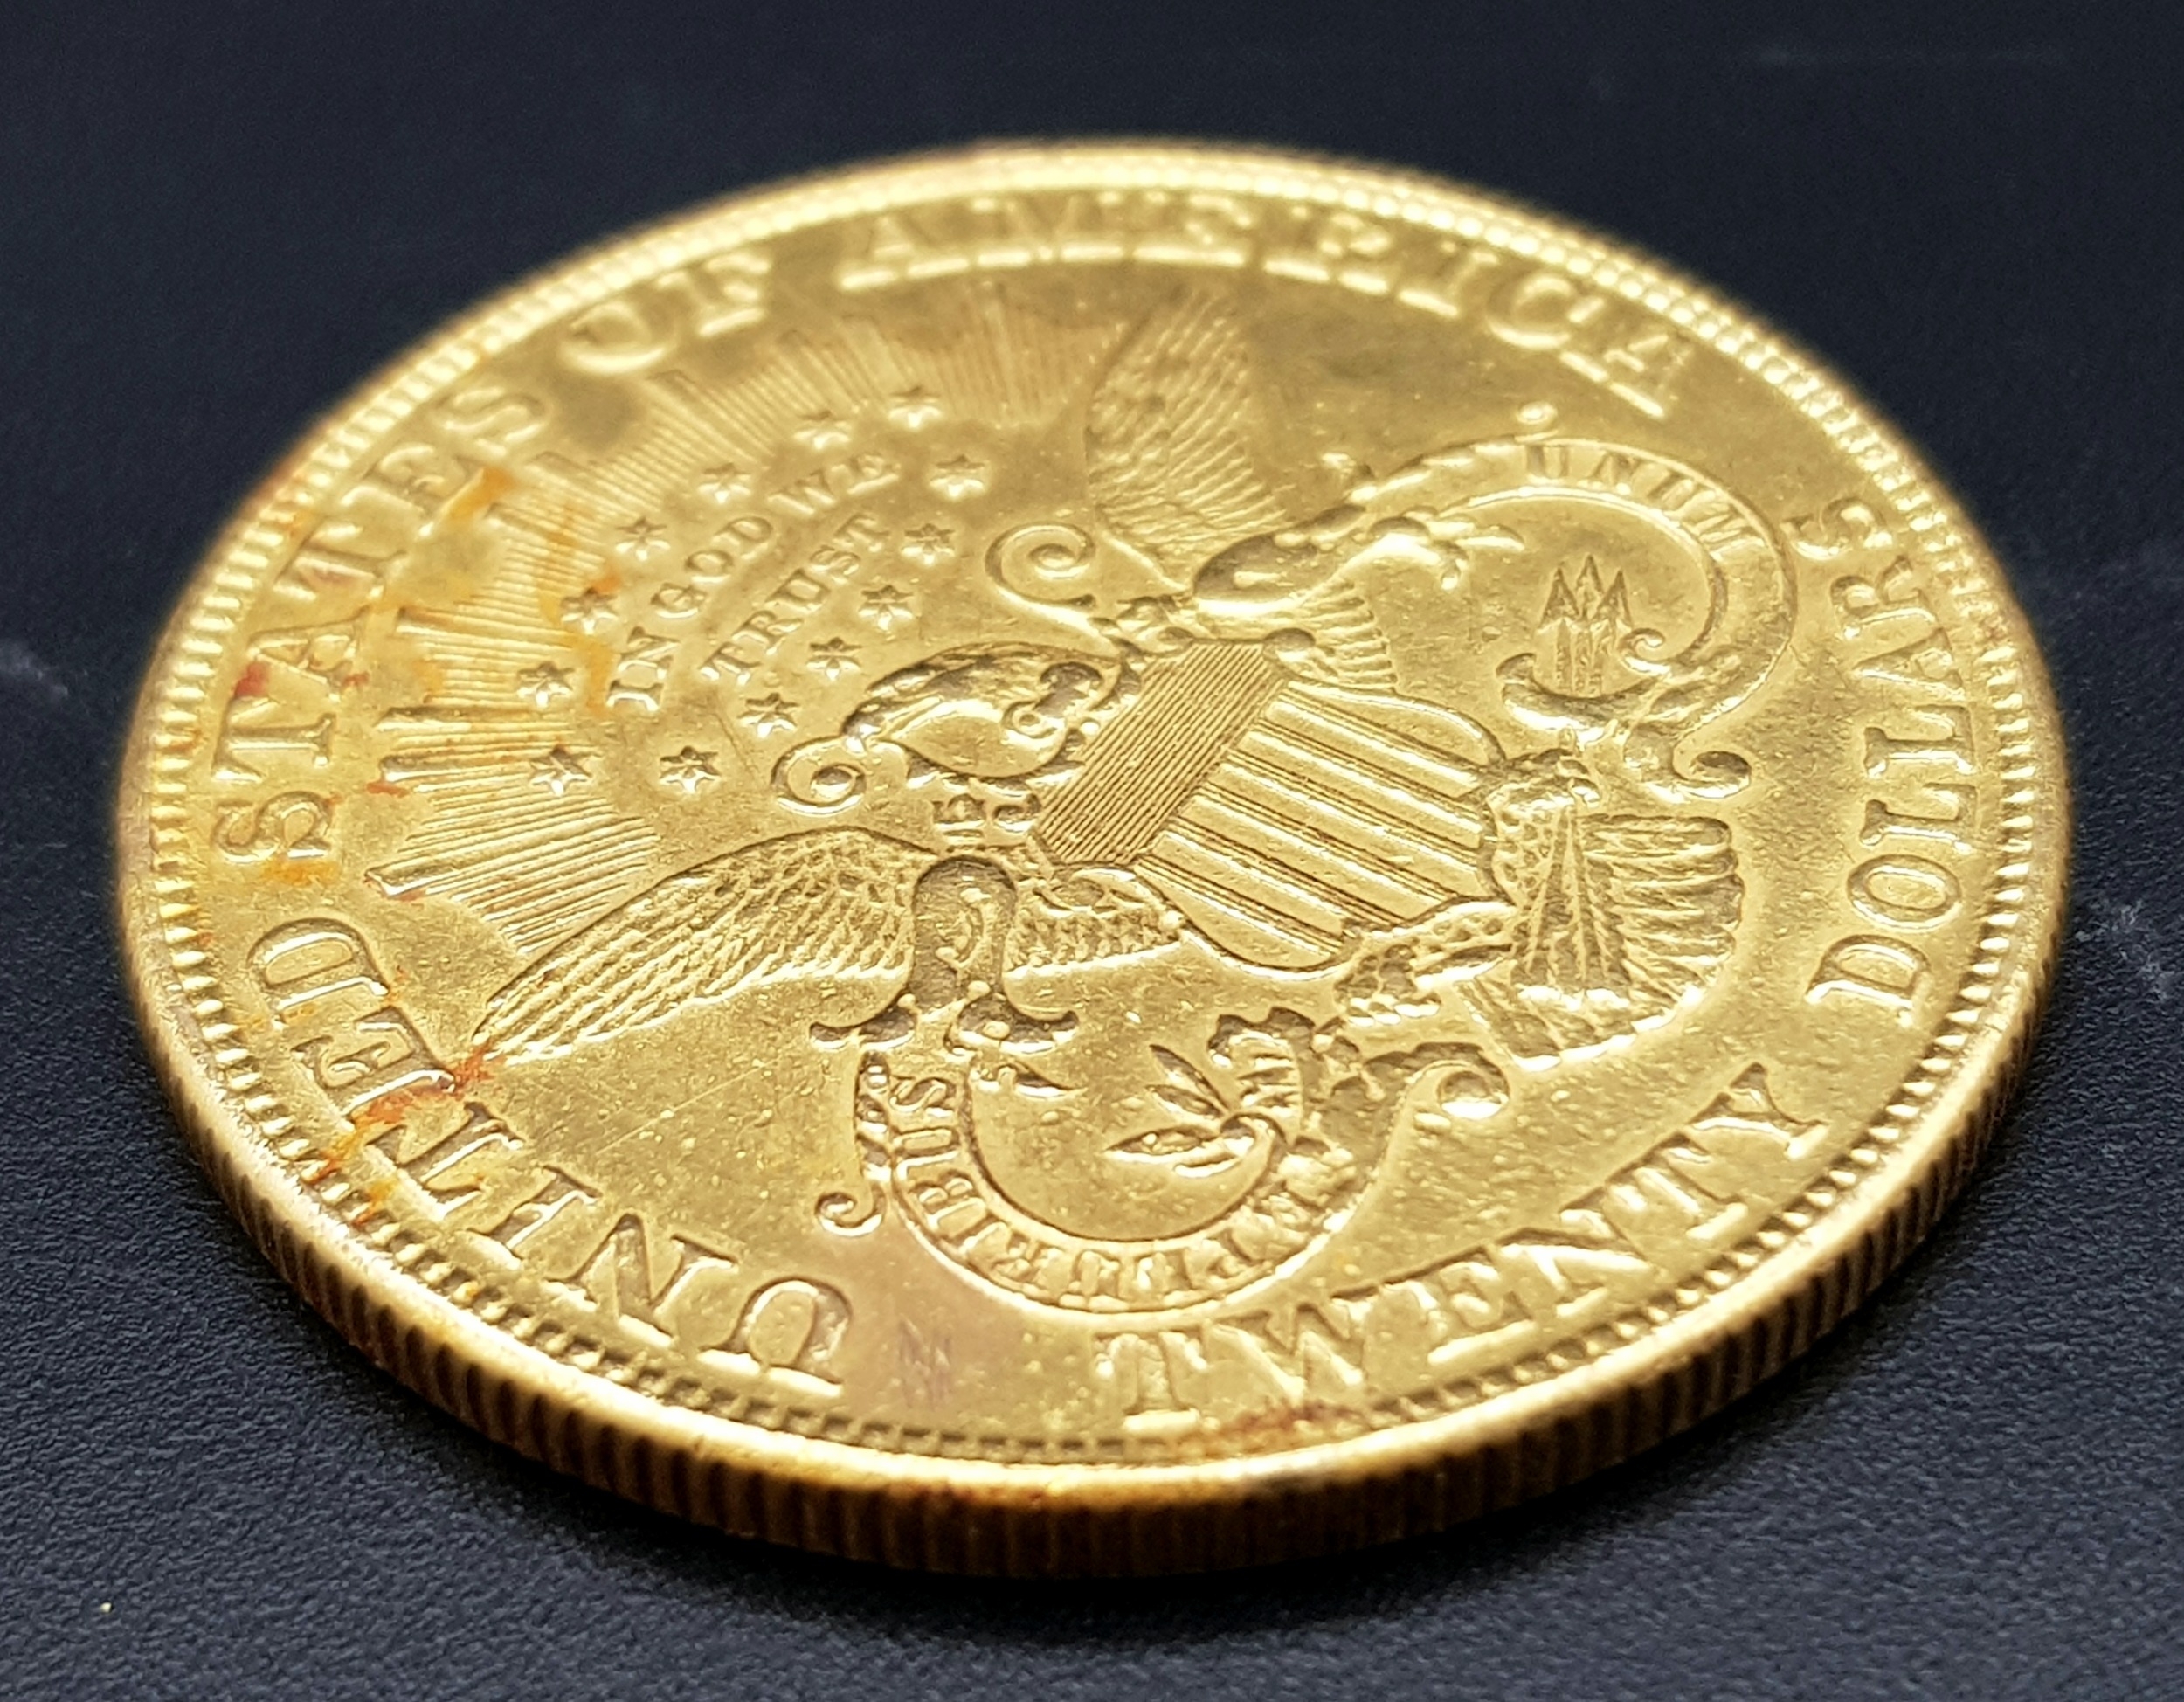 A $20 GOLD LIBERTY COIN DATED 1907 AND WEIGHING 33.43gms THIS COIN IS IN VERY GOOD CONDITION - Image 3 of 8